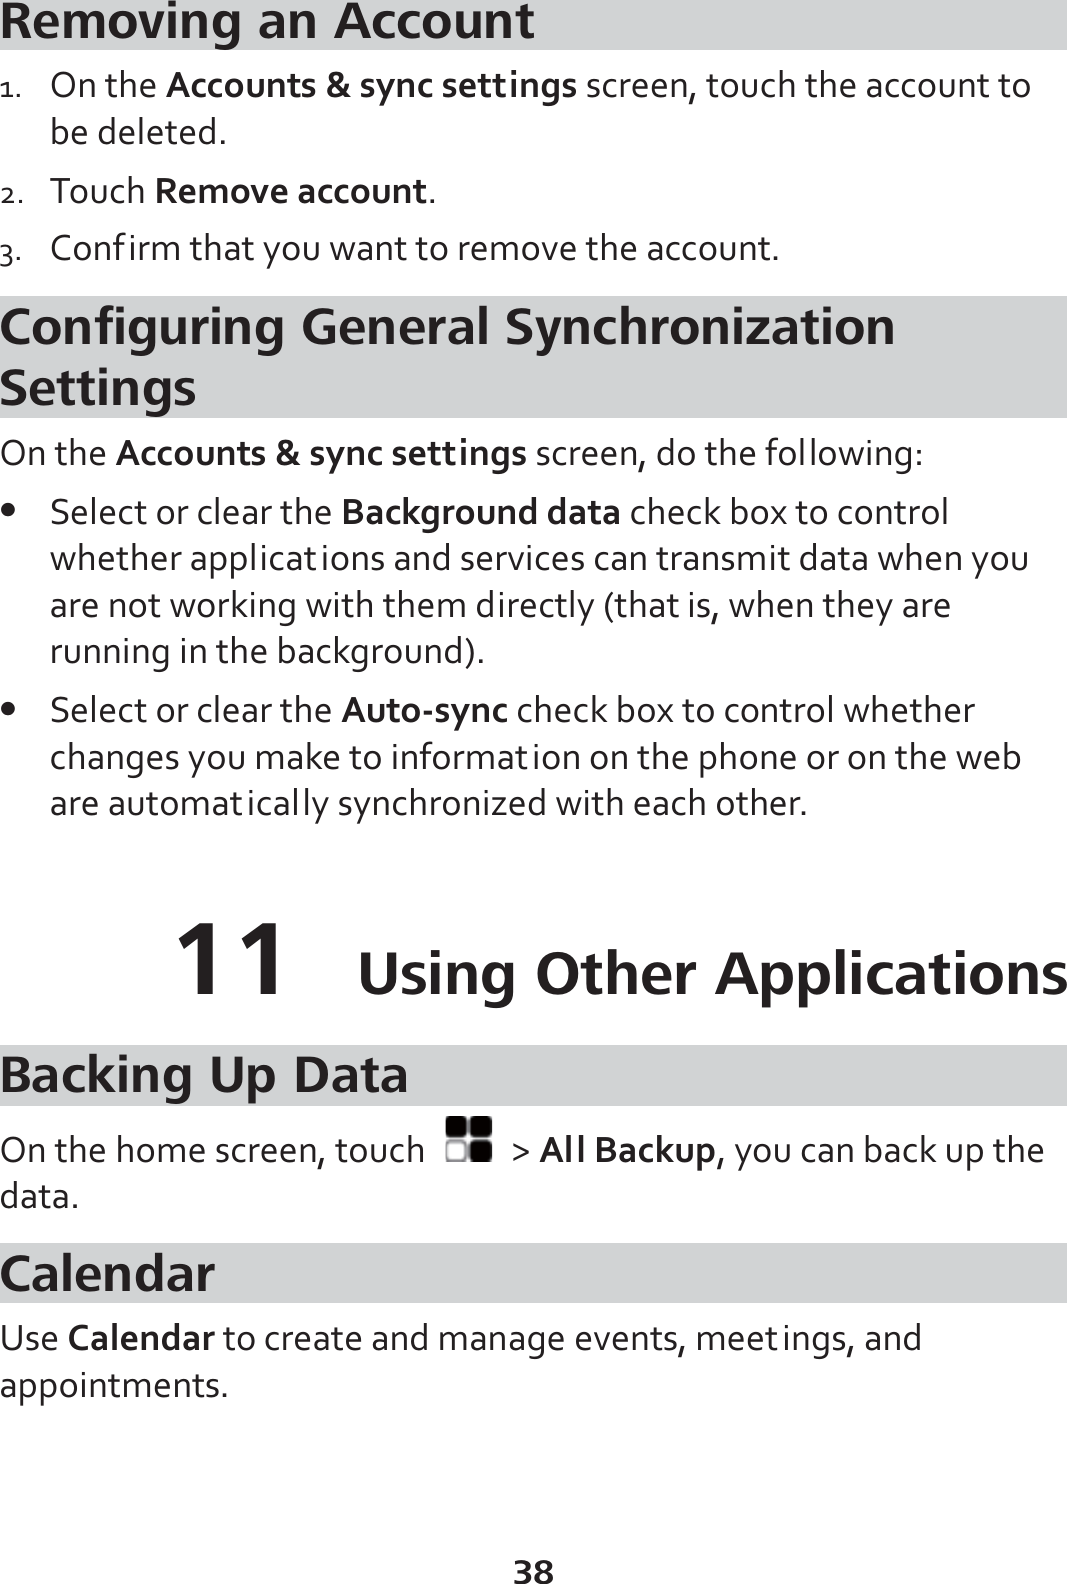 38 Removing an Account 1. On the Accounts &amp; sync settings screen, touch the account to be deleted. 2. Touch Remove account. 3. Confirm that you want to remove the account. Configuring General Synchronization Settings On the Accounts &amp; sync settings screen, do the following: z Select or clear the Background data check box to control whether applications and services can transmit data when you are not working with them directly (that is, when they are running in the background). z Select or clear the Auto-sync check box to control whether changes you make to information on the phone or on the web are automatically synchronized with each other. 11  Using Other Applications Backing Up Data On the home screen, touch   &gt; All Backup, you can back up the data. Calendar Use Calendar to create and manage events, meetings, and appointments. 